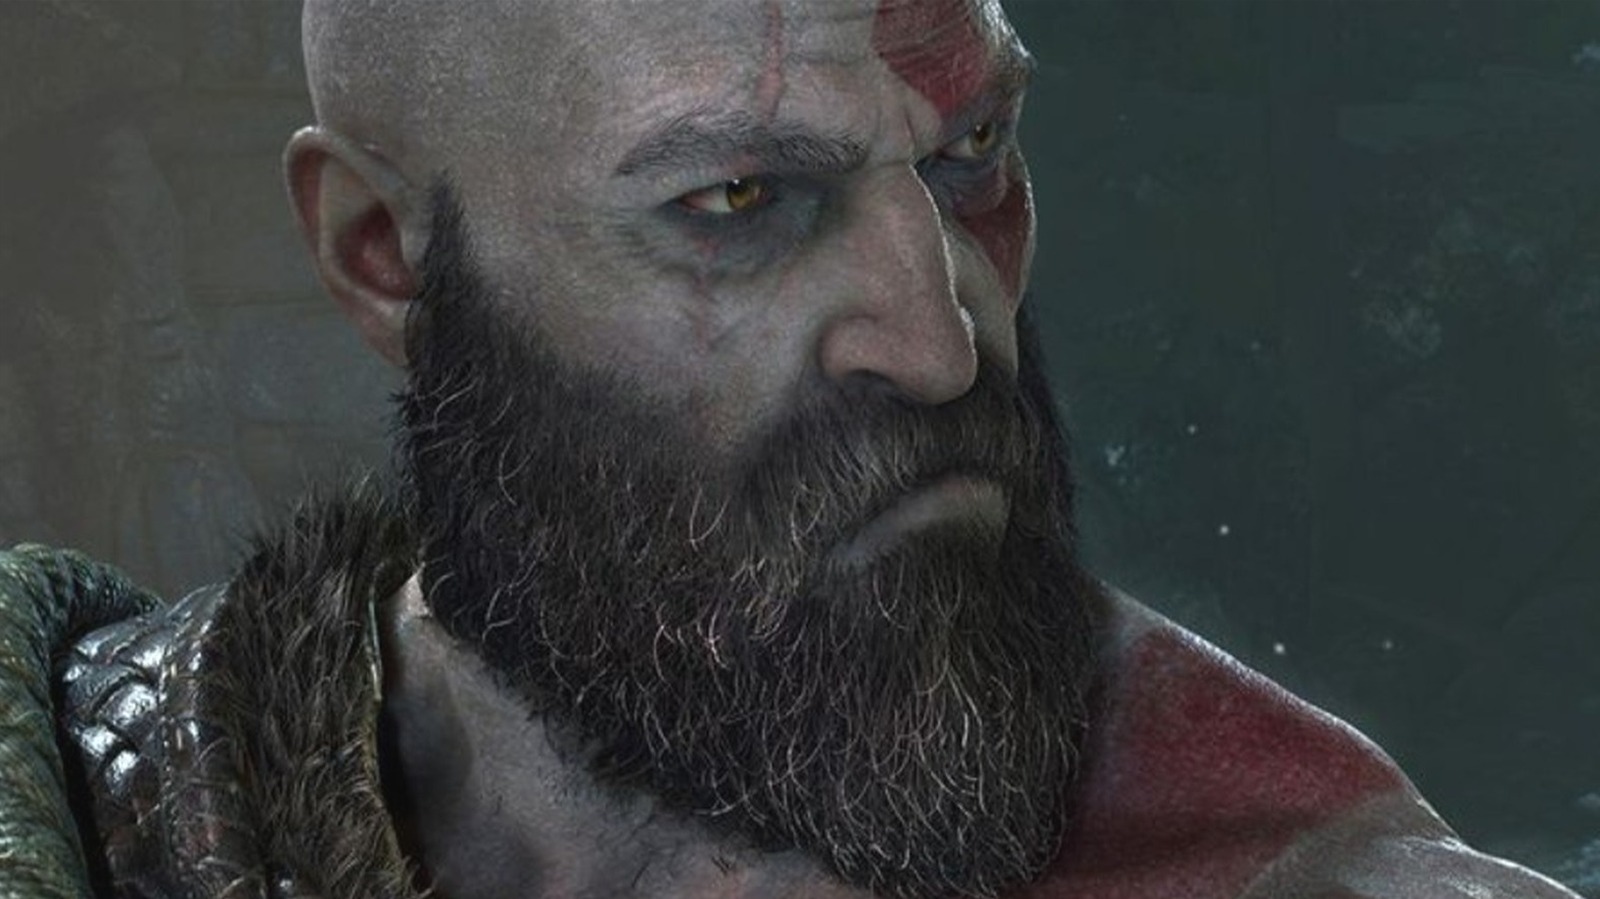 How to play God Of War Chain of Olympus in 60 FPS